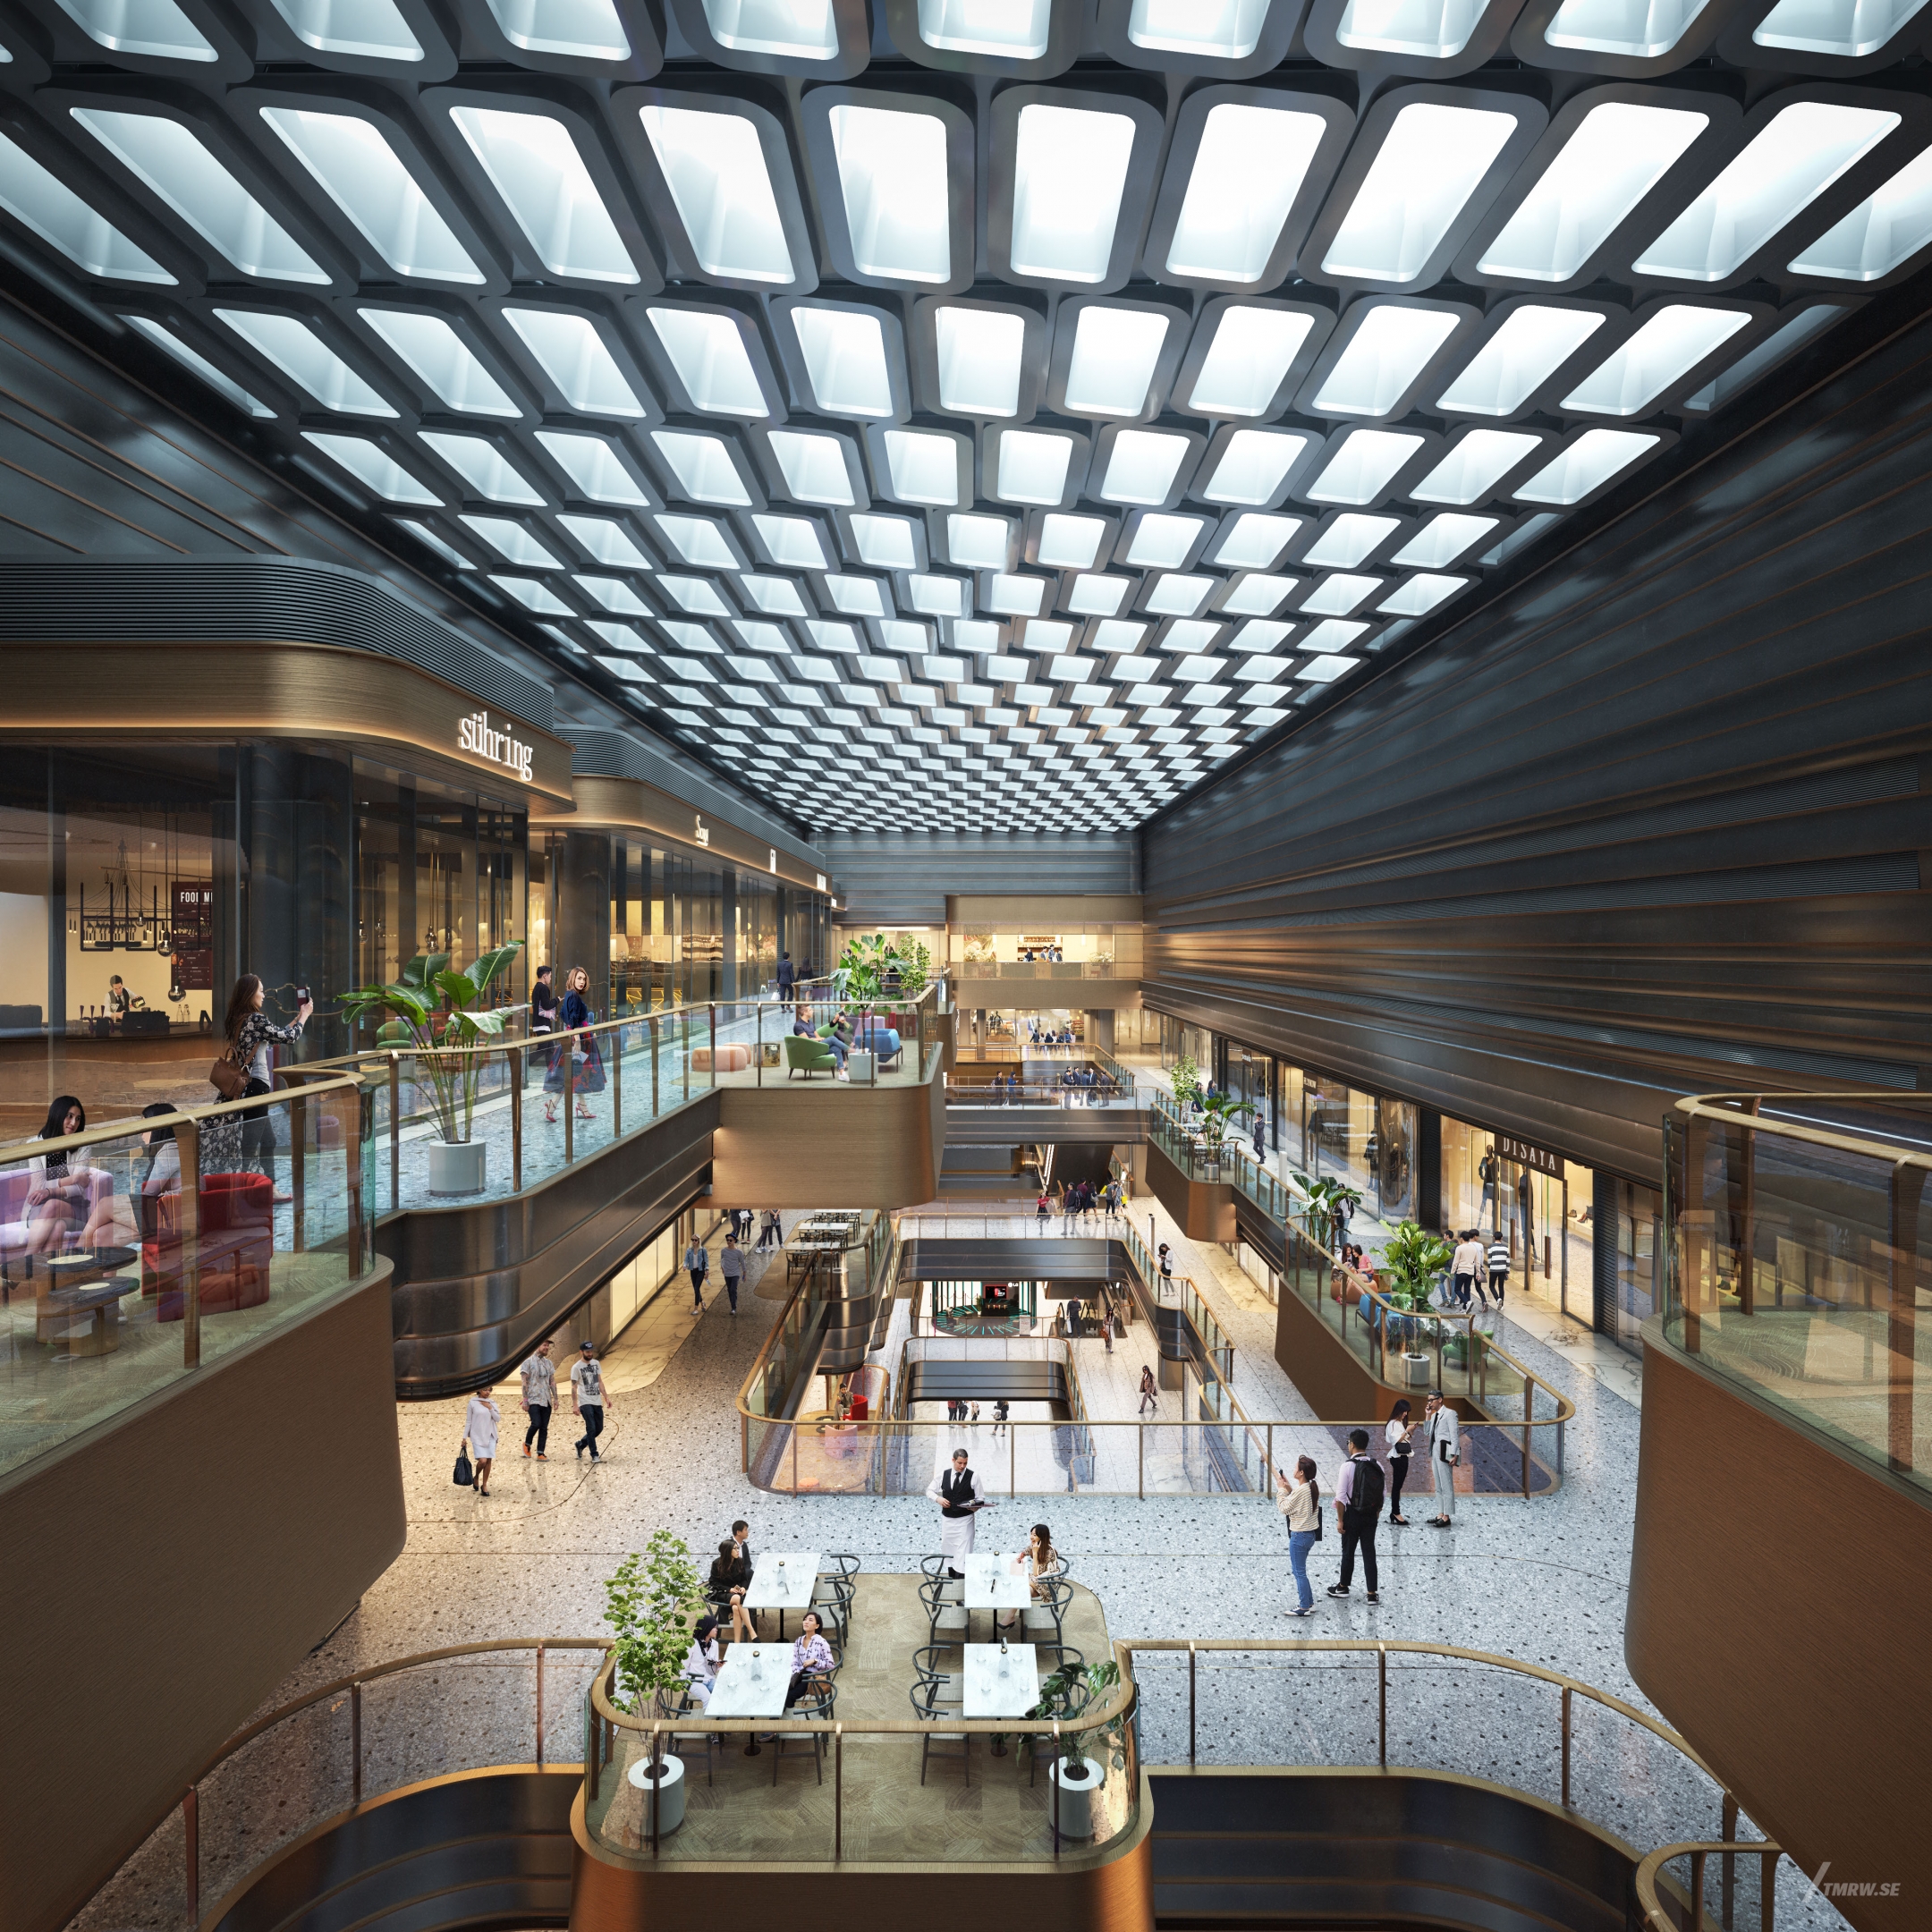 Architectural visualization Suanlum of for KPF. An image of the interior of a shopping mall with people walking around from semi aerial view.